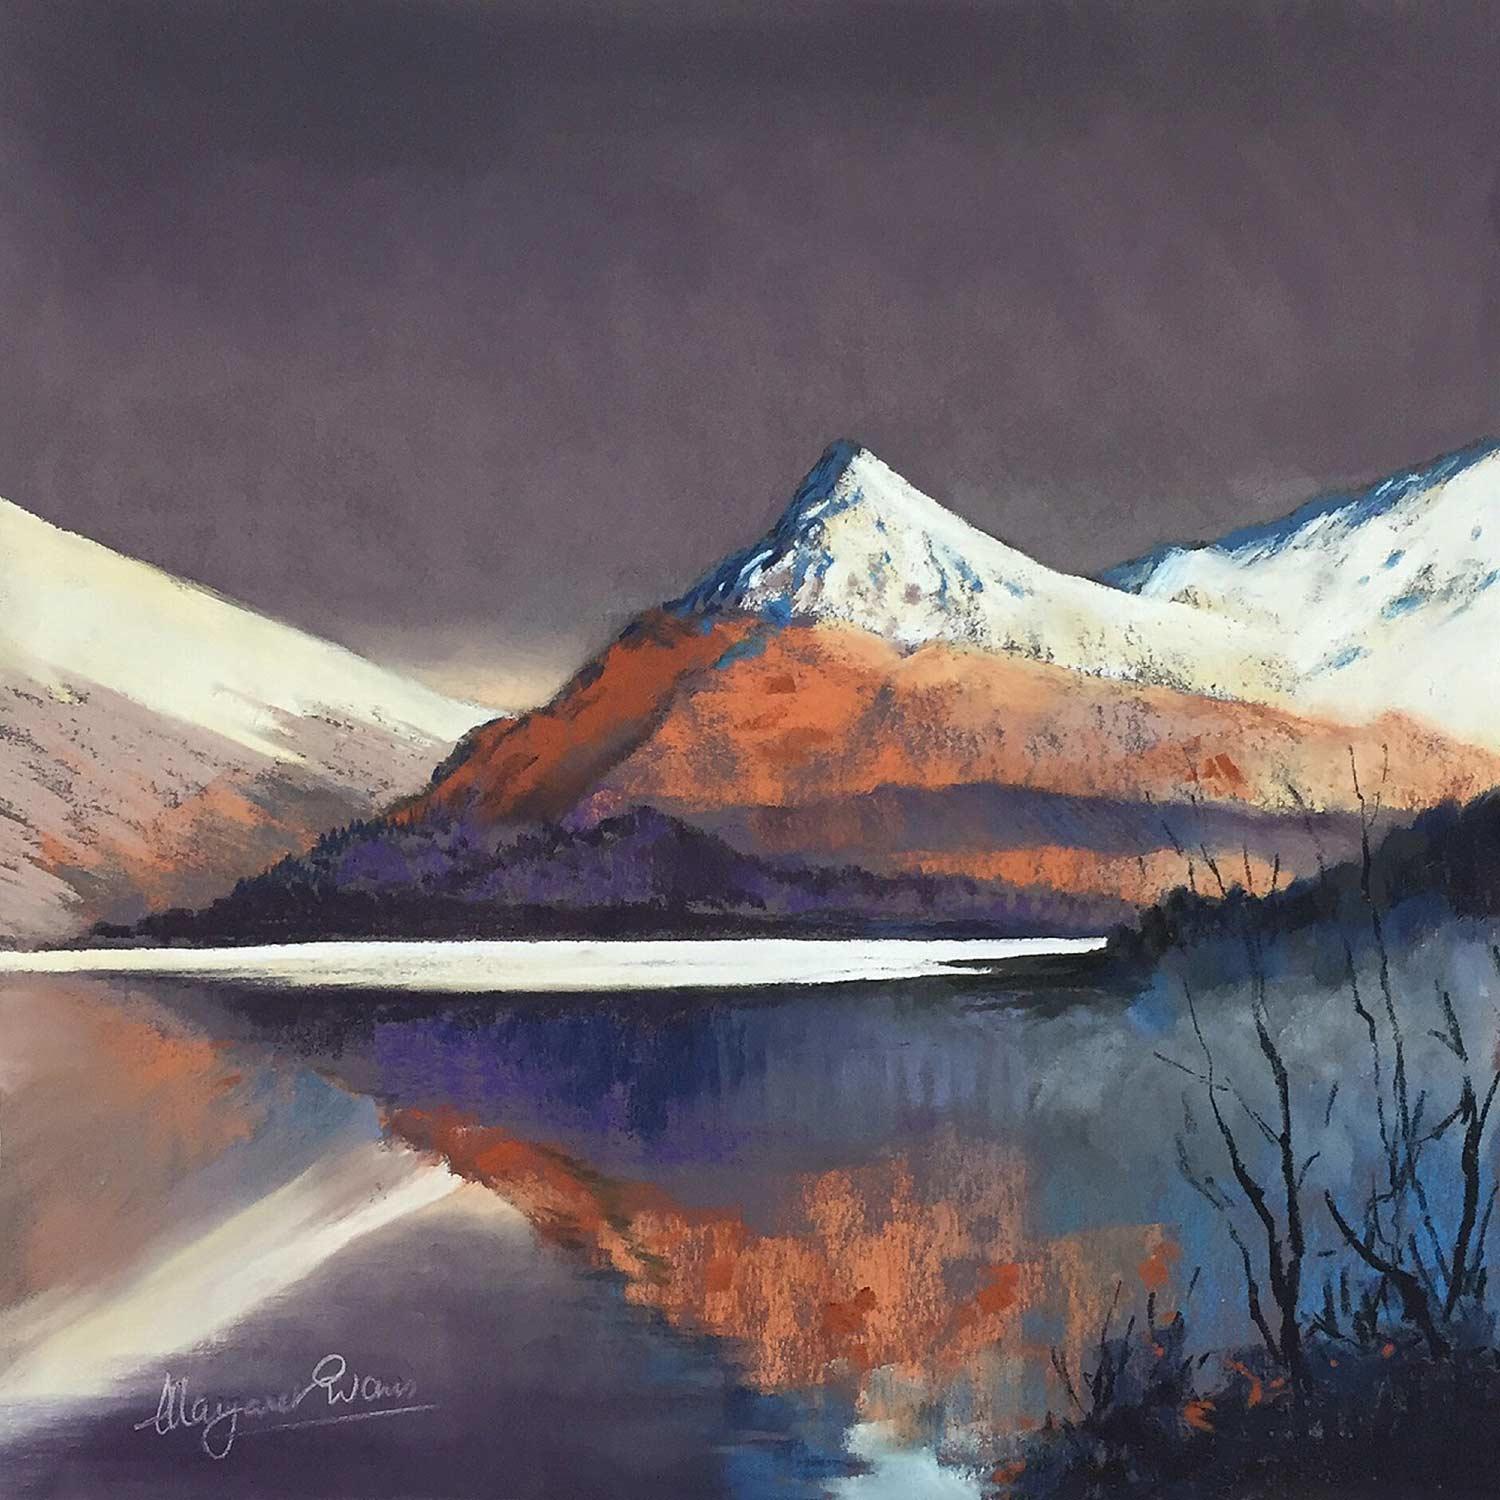 First Snow, Pap of Glencoe by Margaret Evans